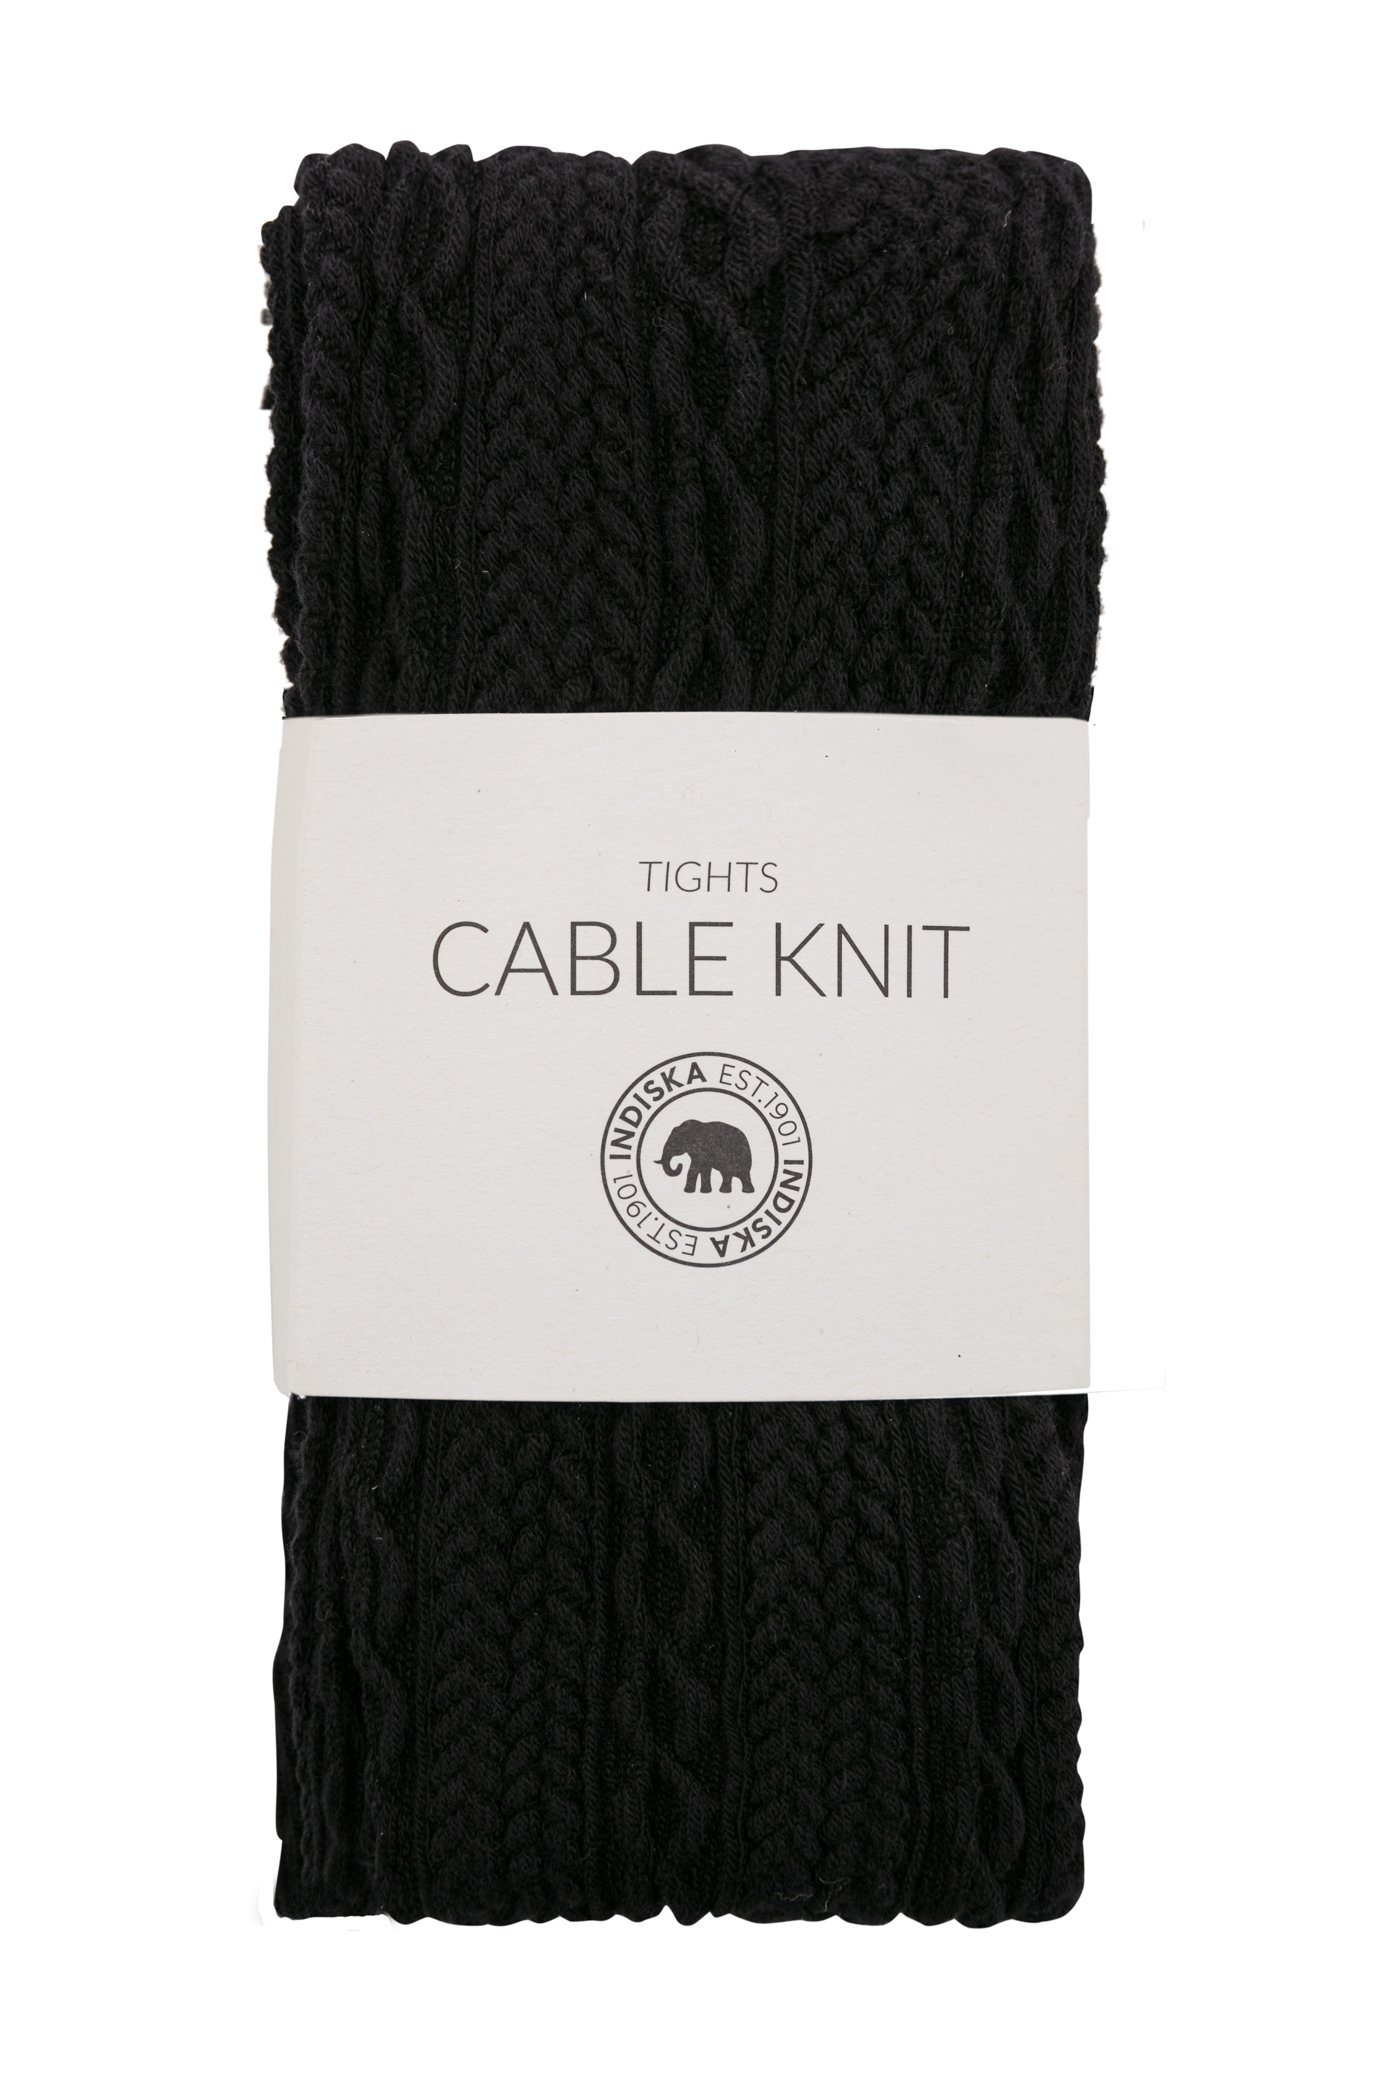 Cable knit tights